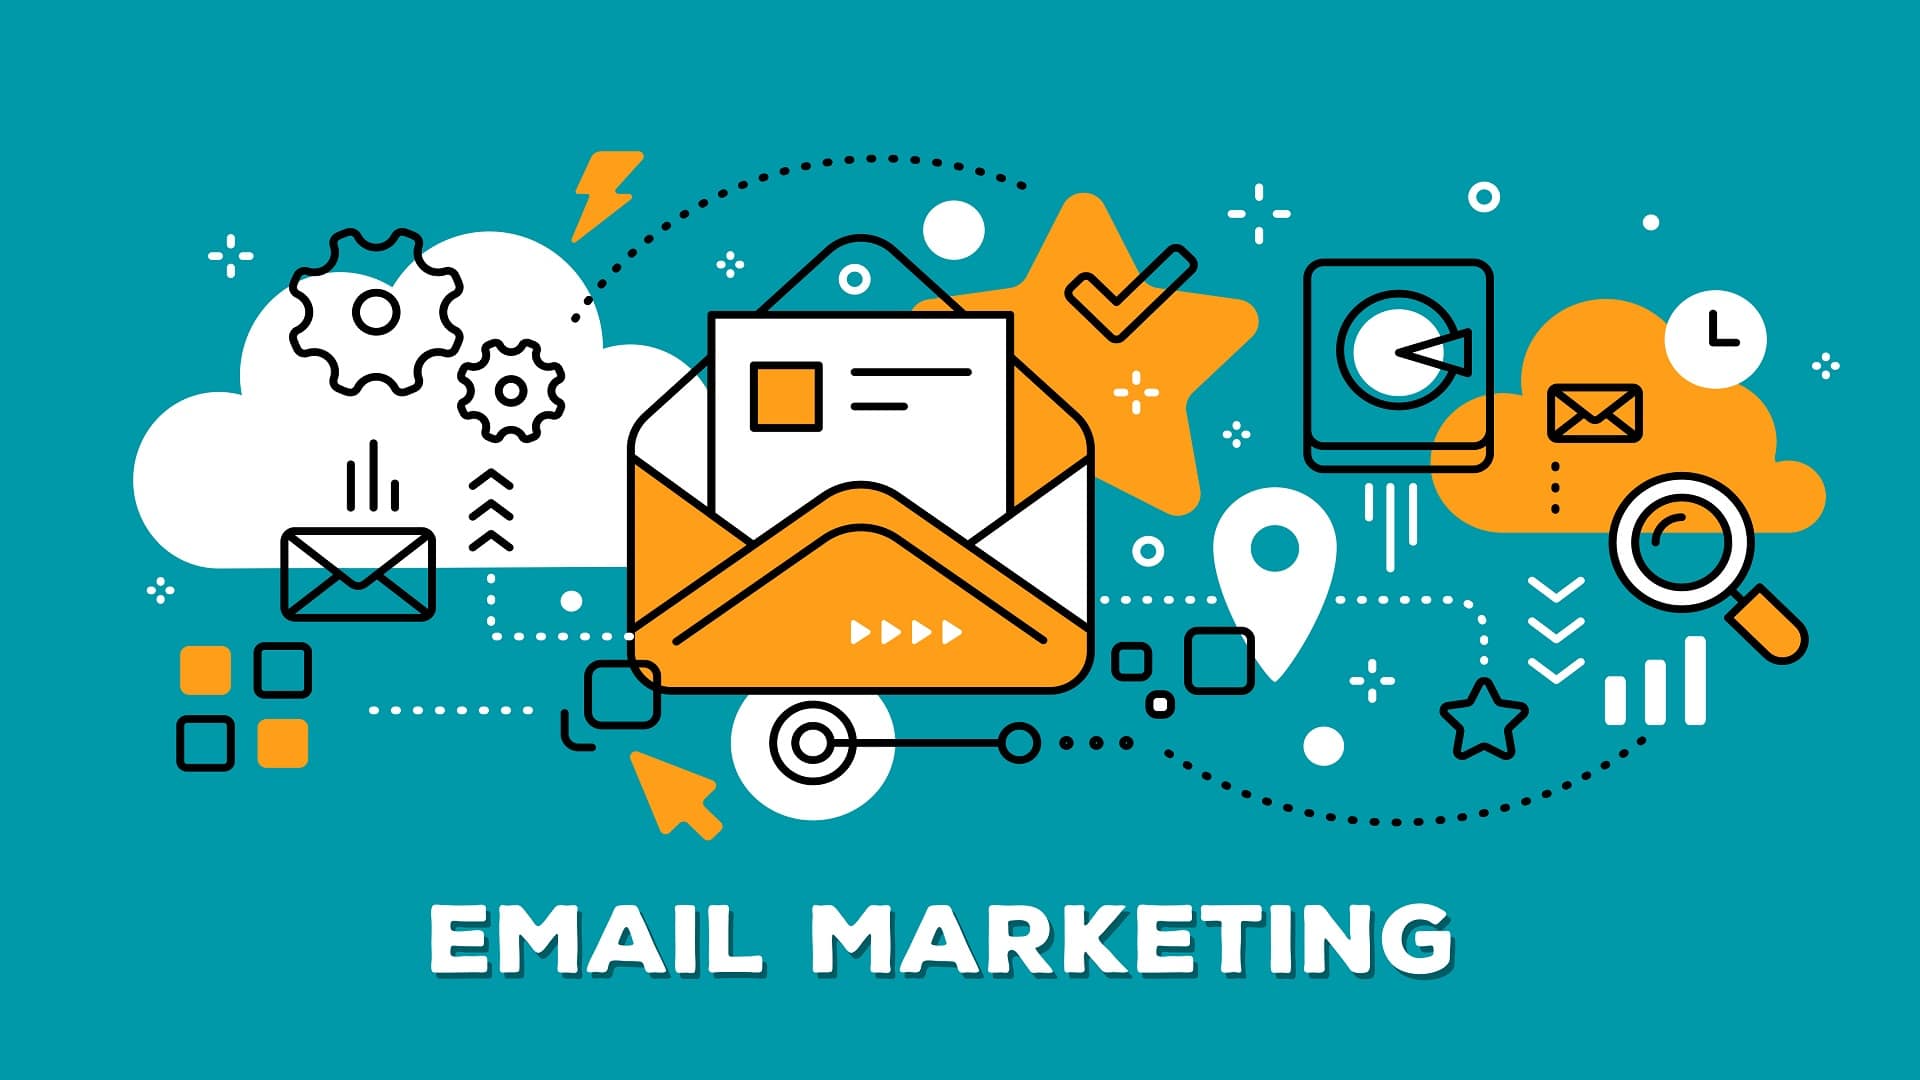 Email marketing training can improve customer engagement, increase sales, and boost ROI.